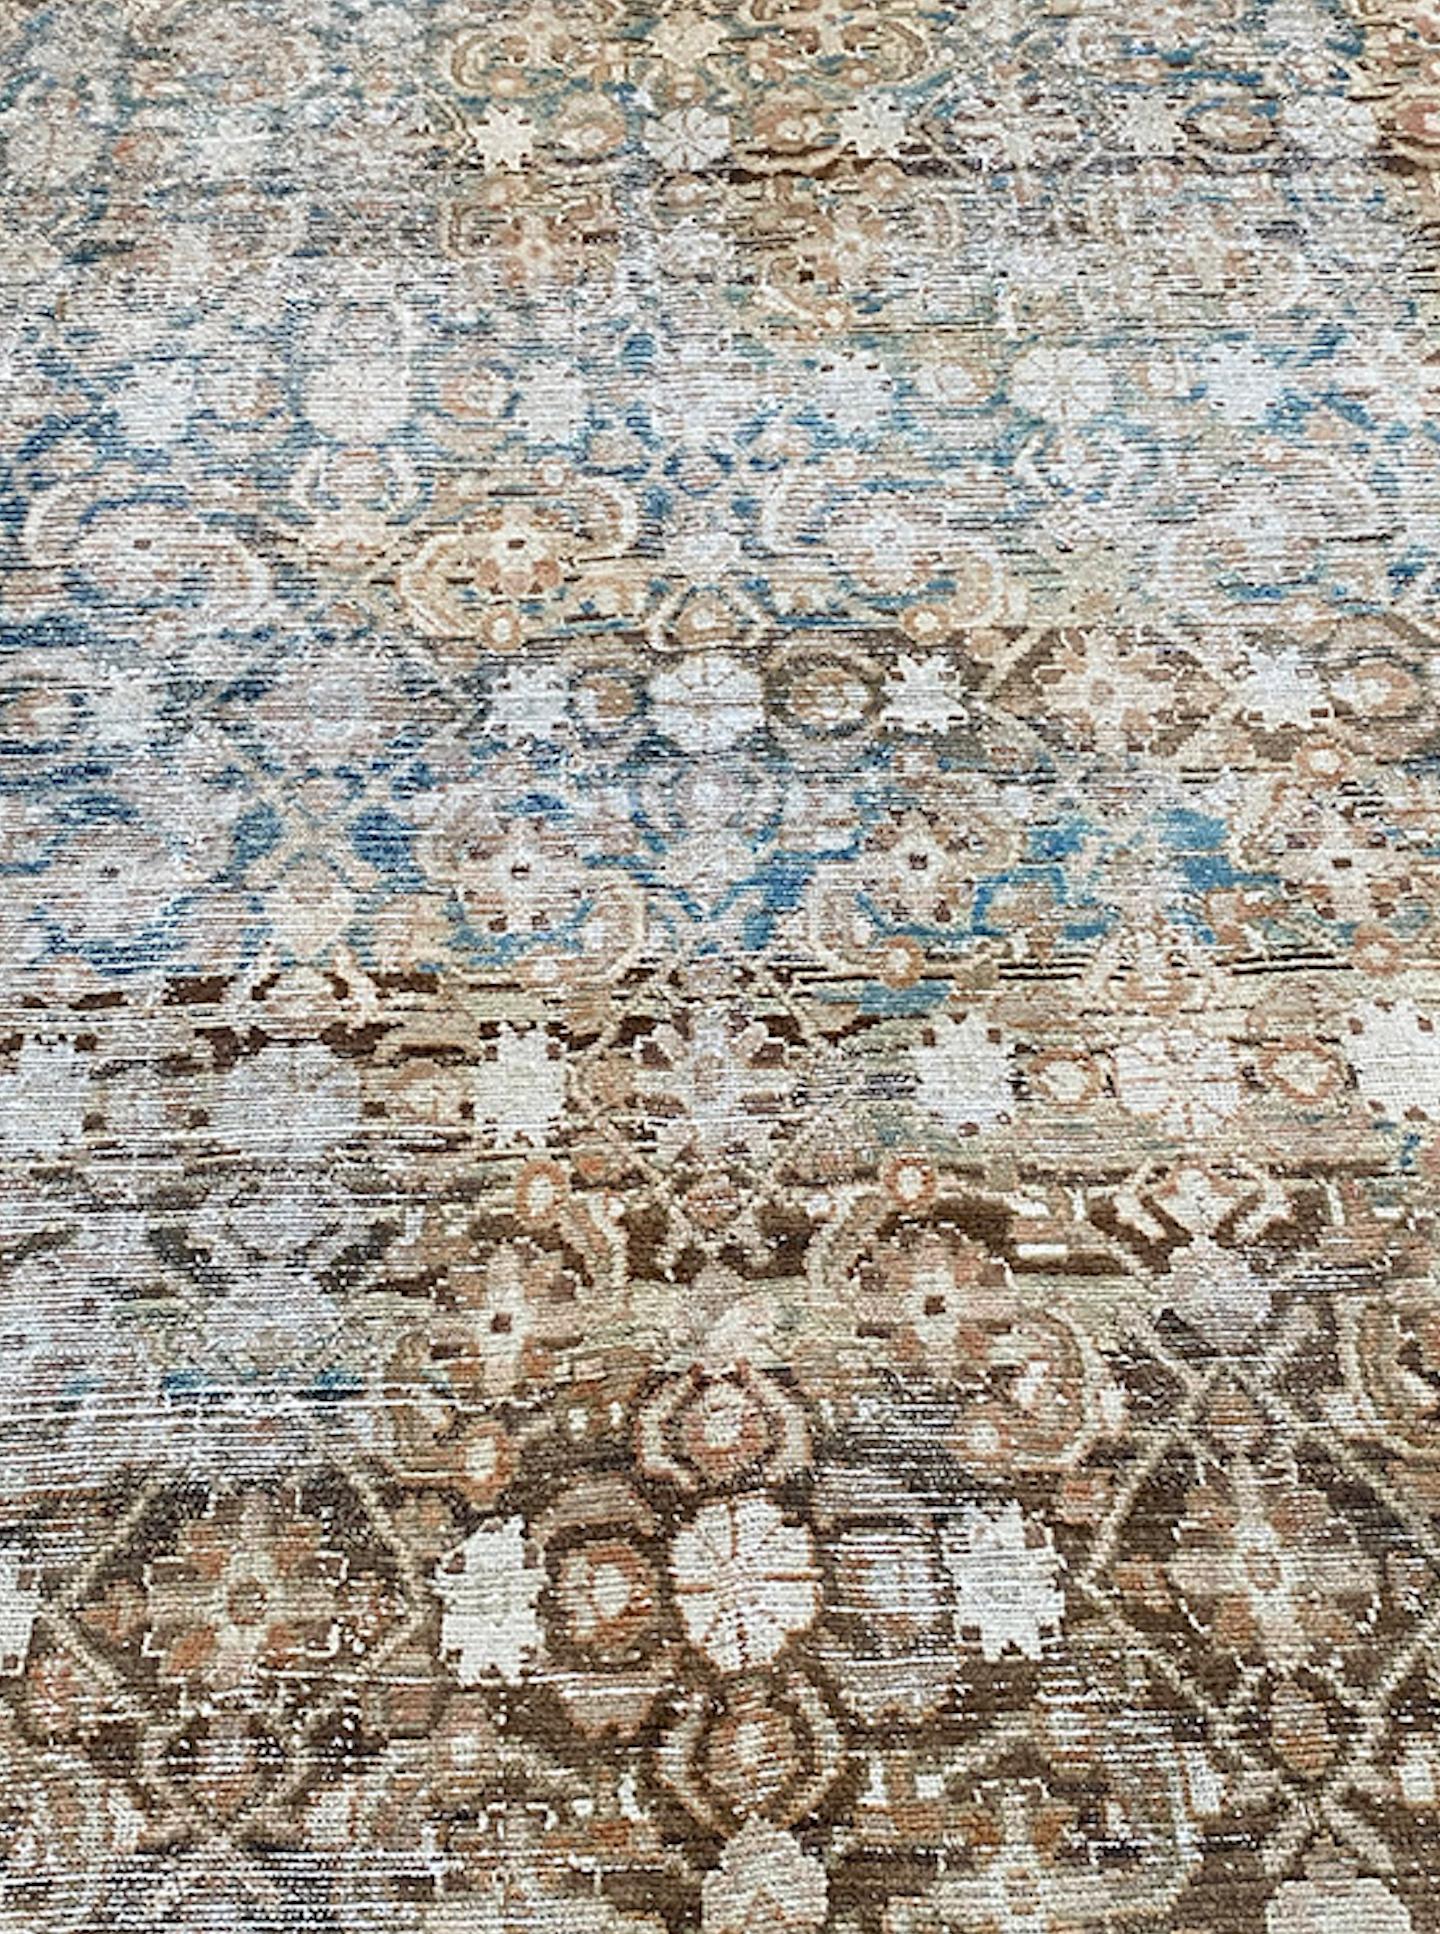 Orgin: Persia
Dimensions: 17’5? x 5'
Age: 1920’s
Design: Mahal Runner
Material: 100% Wool-pile
Color: Beige, Brown, Aqua

13260

Persian rugs and carpets of various types were woven in parallel by nomadic tribes in village and town